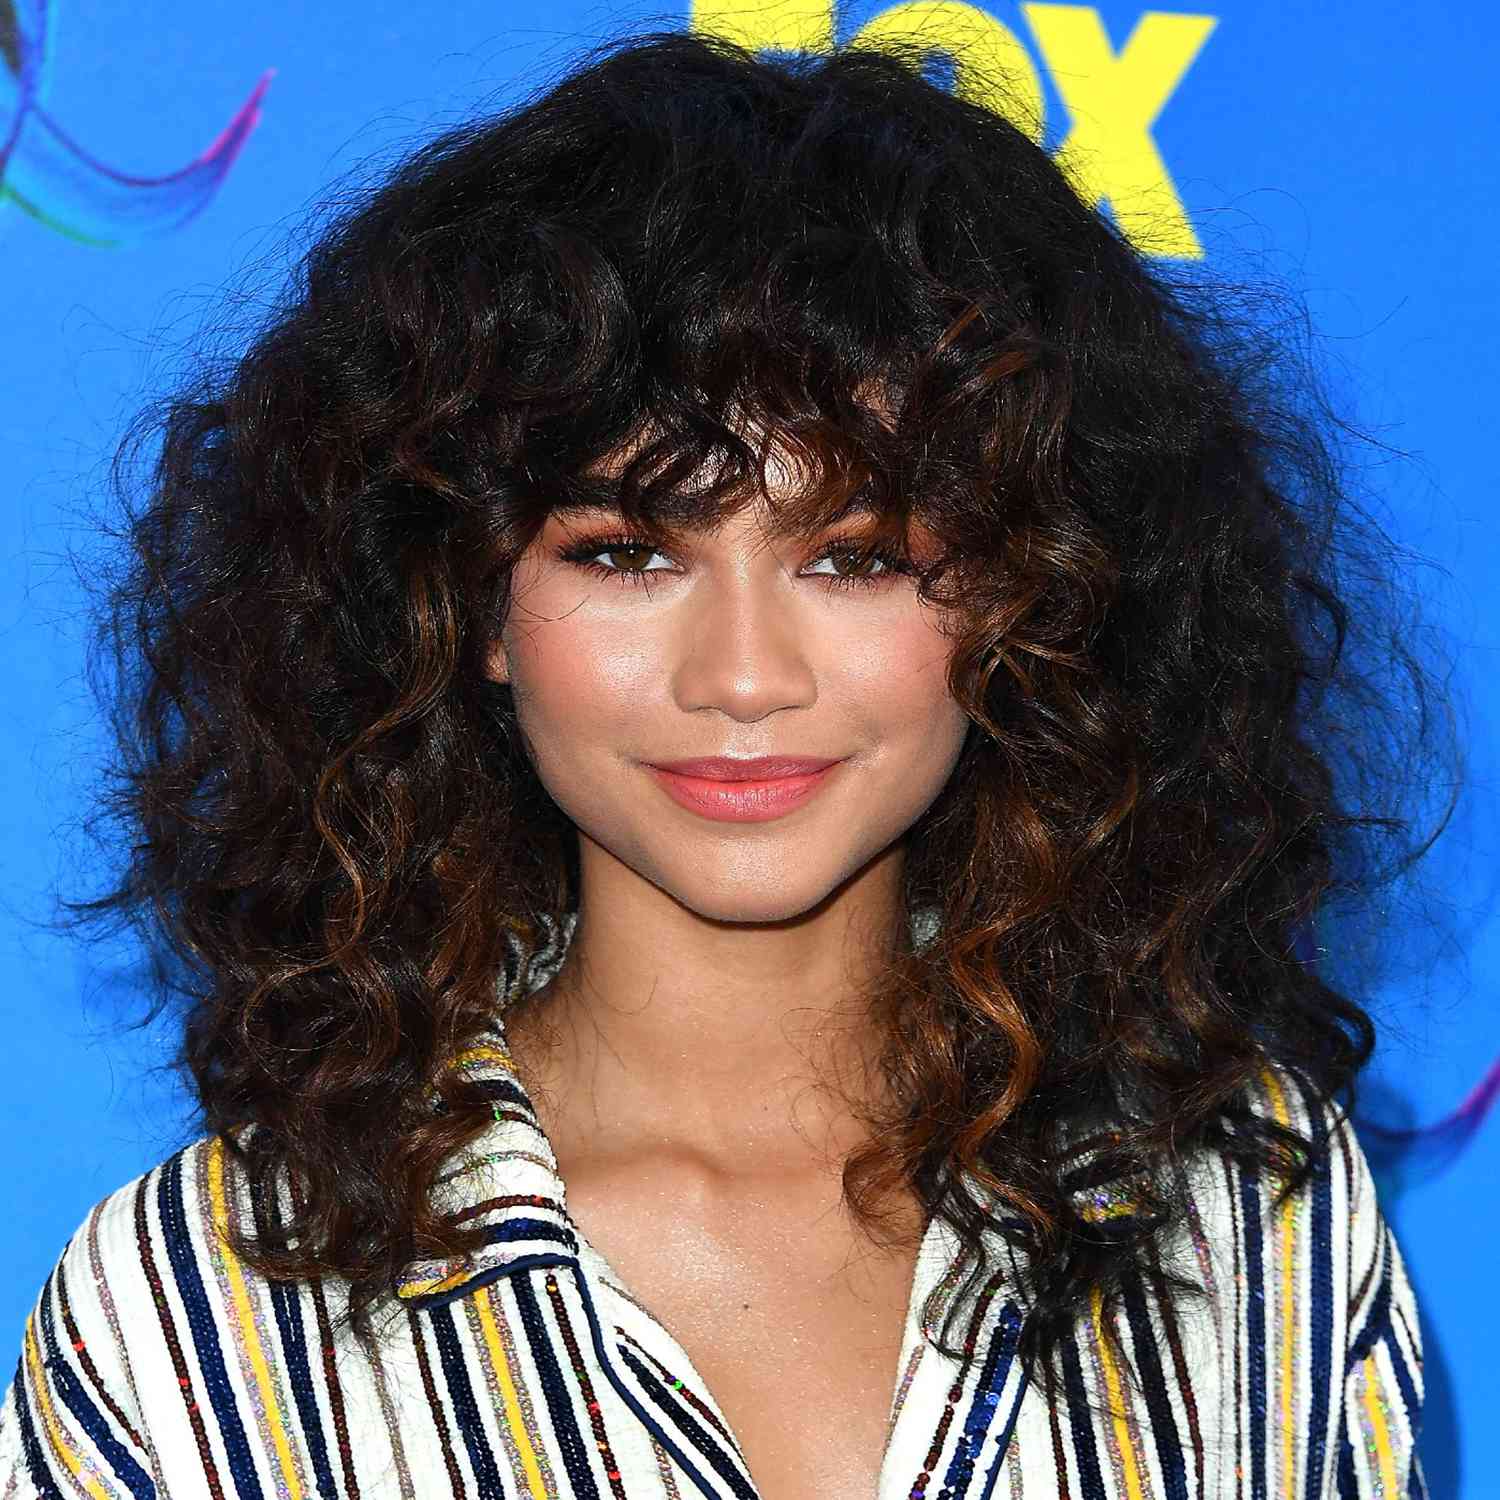 Zendaya with a curly shag hairstyle